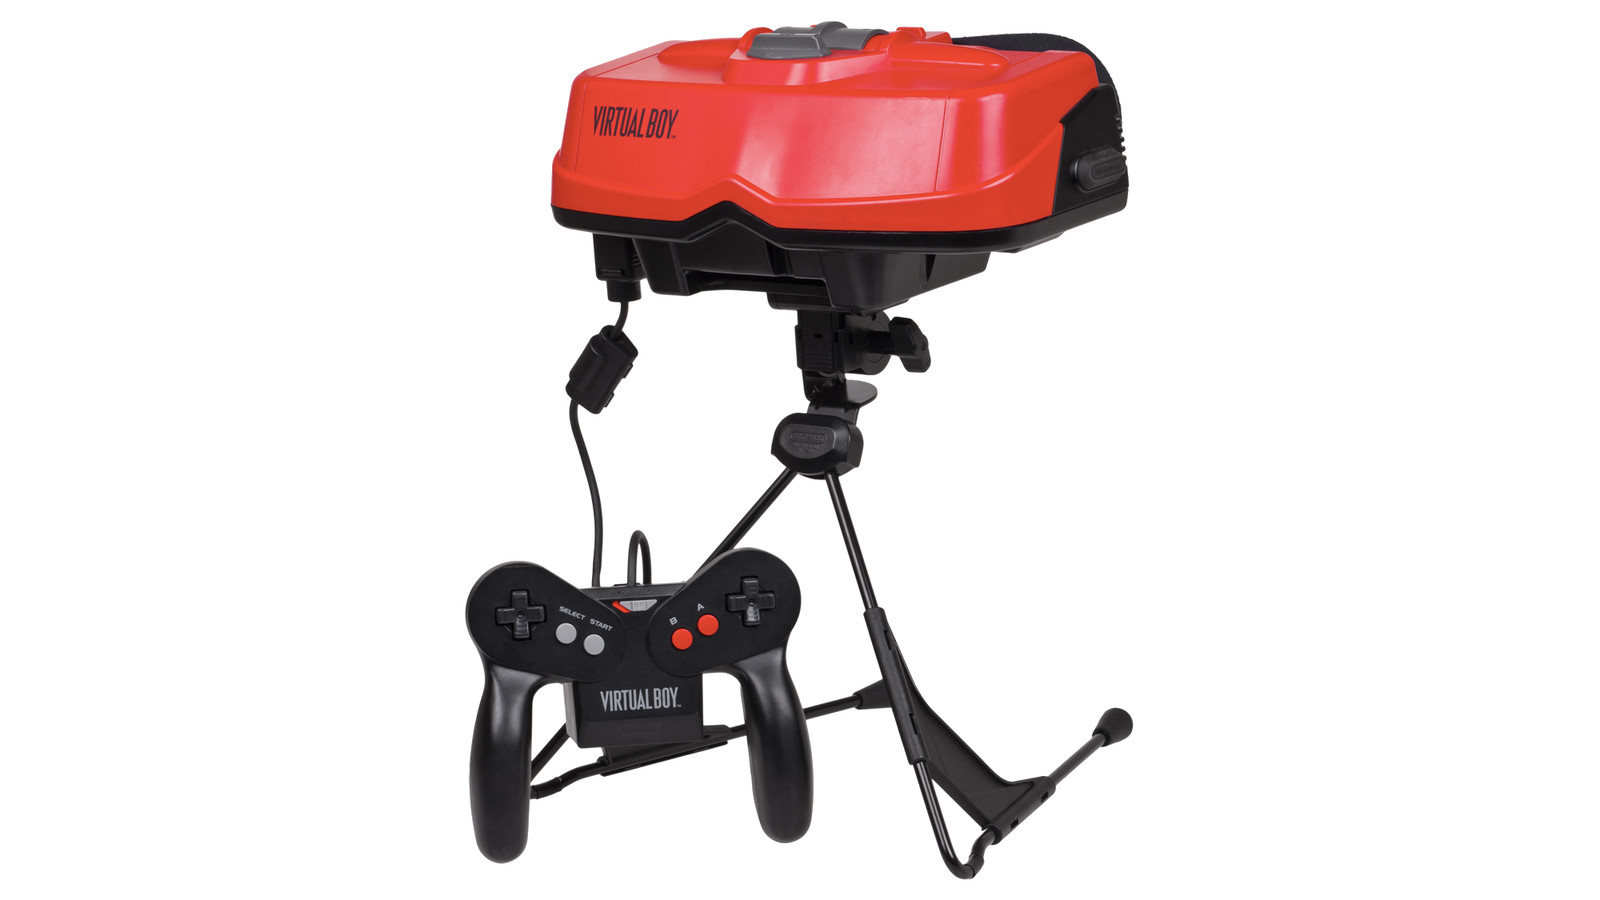 Nintendo is exploring VR again, 20 years after the Virtual Boy flop